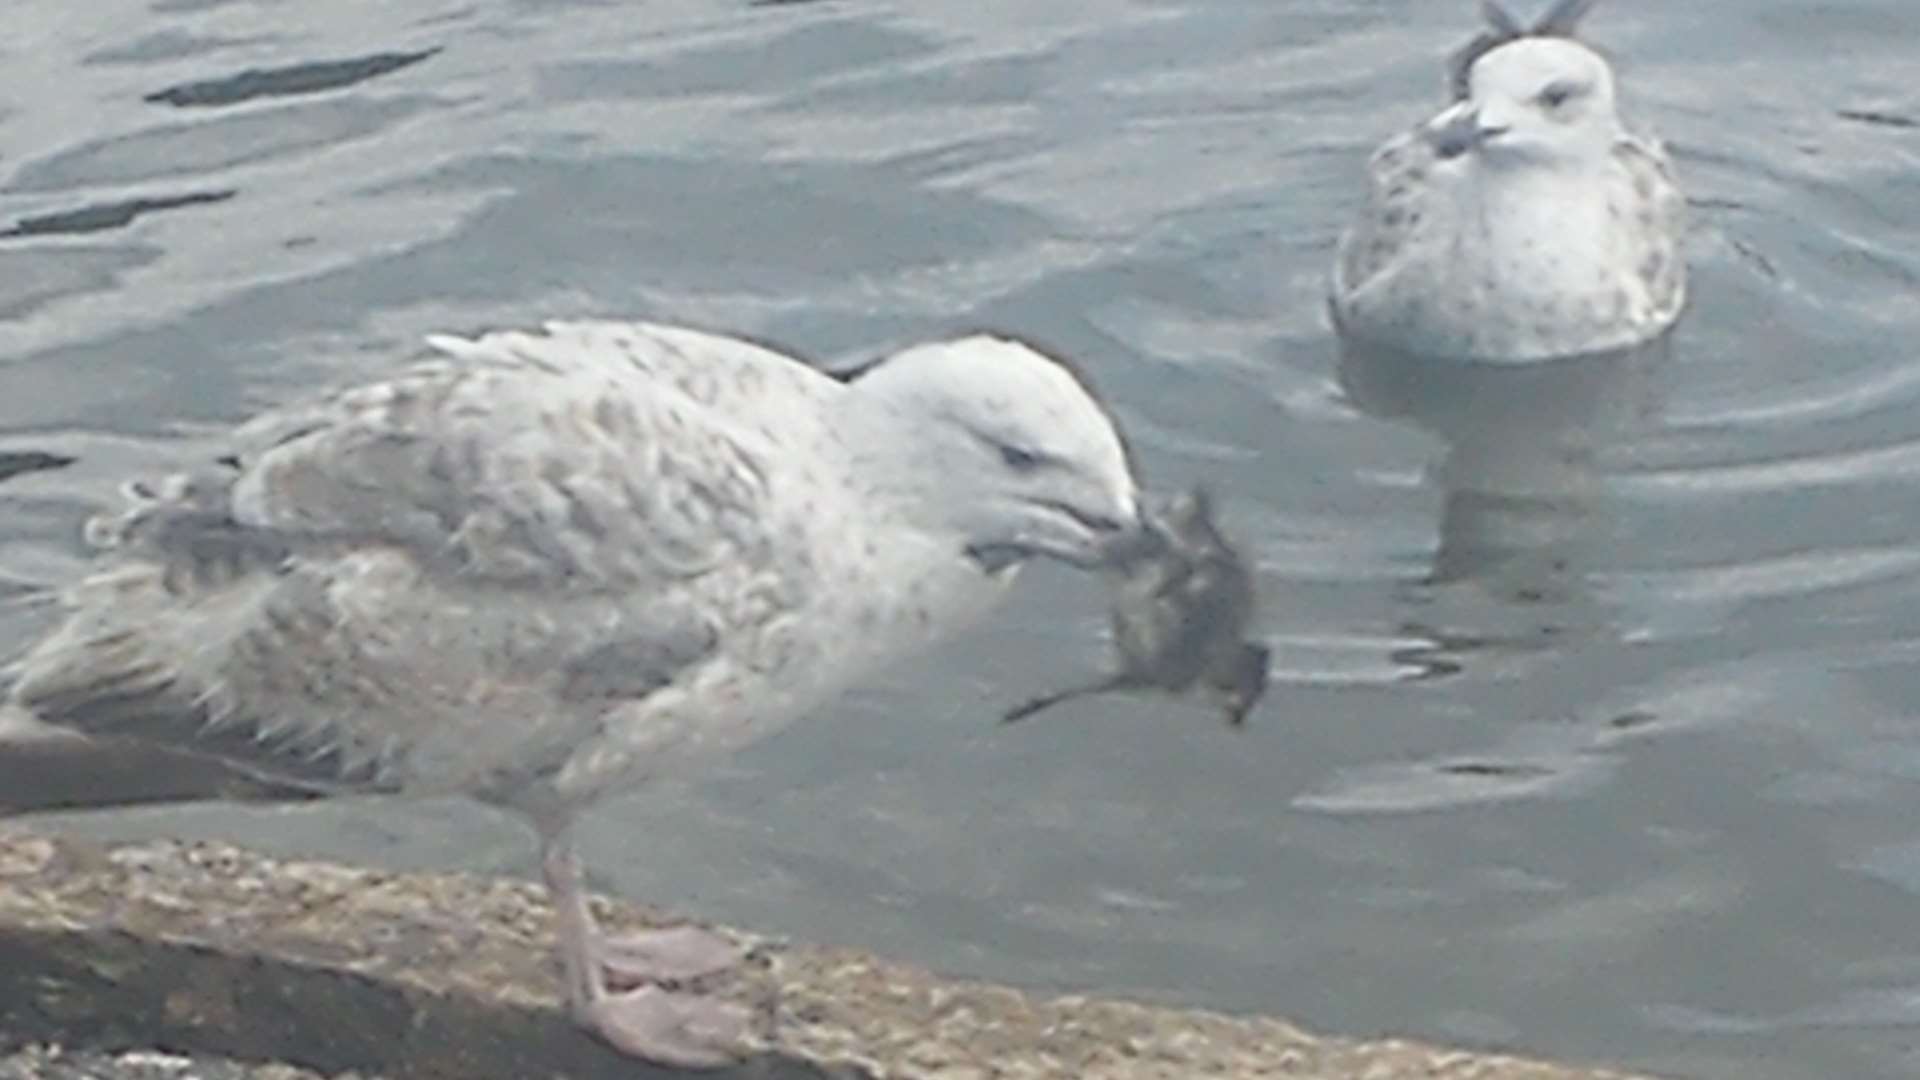 Seagulls are to blame for eating ducklings at Memorial Park, according to a councillor